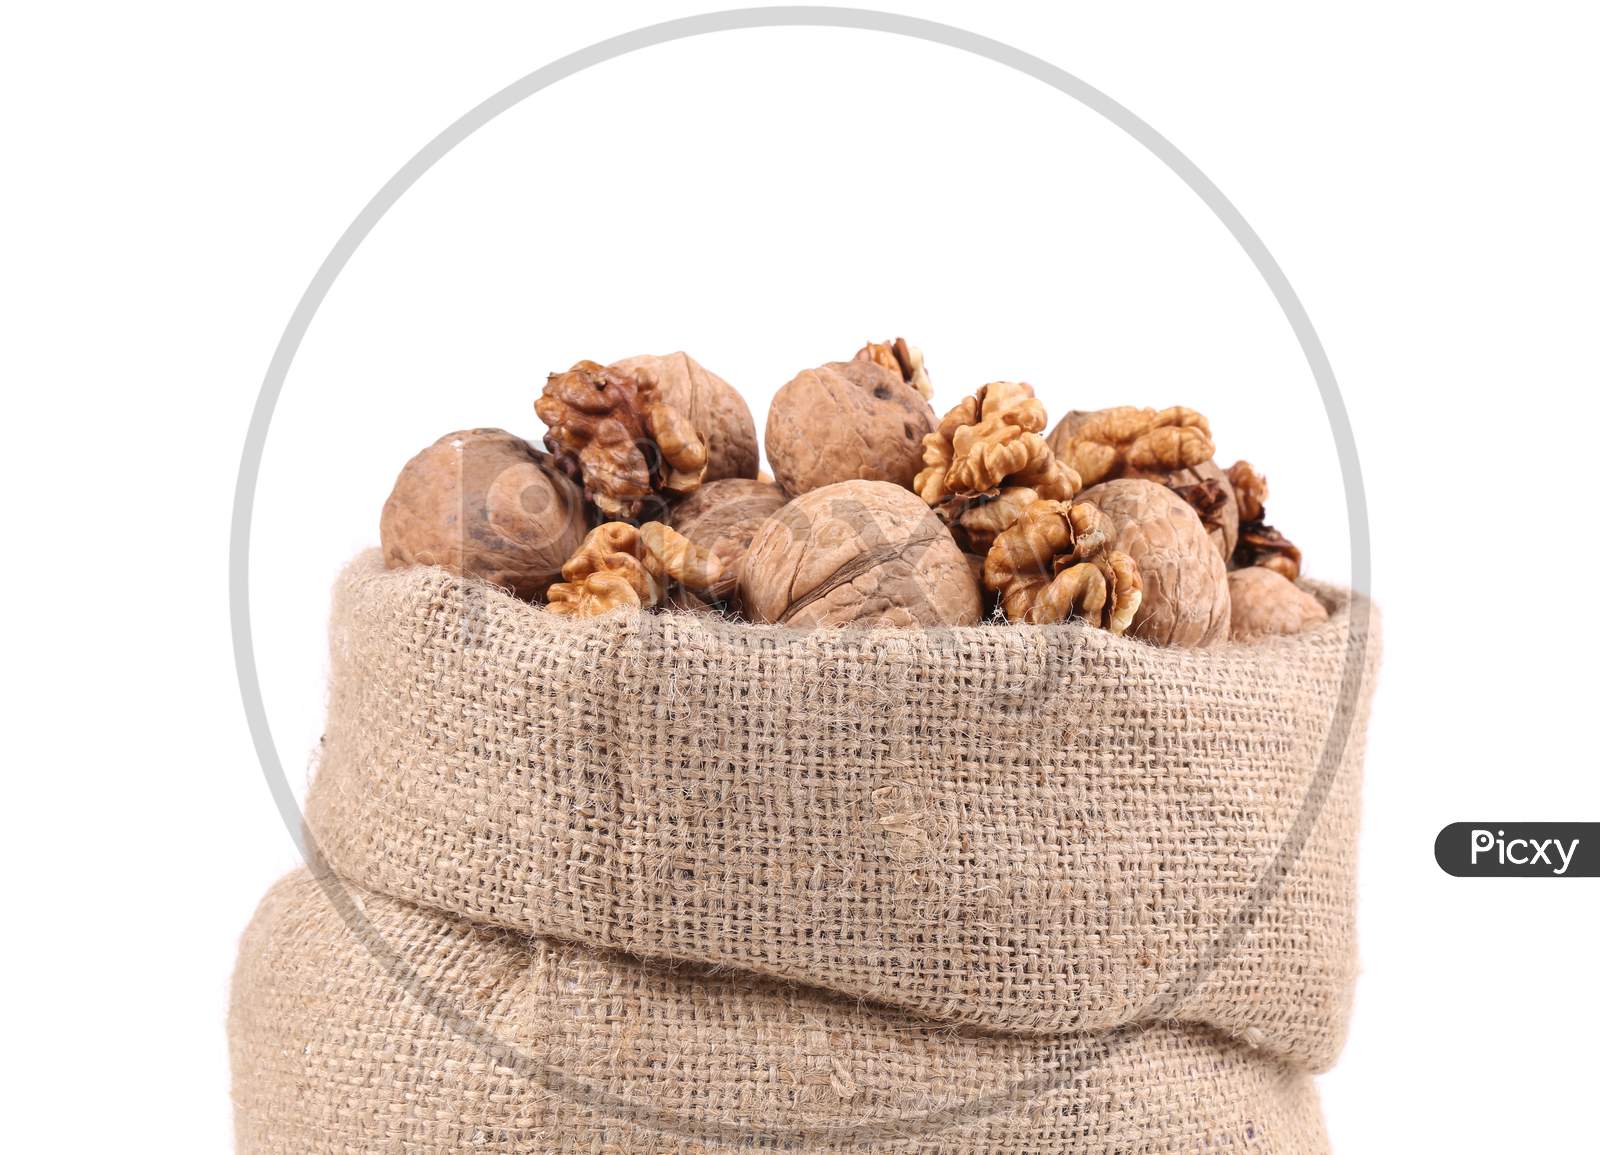 Full Bag With Walnuts. Isolated On A White Background.